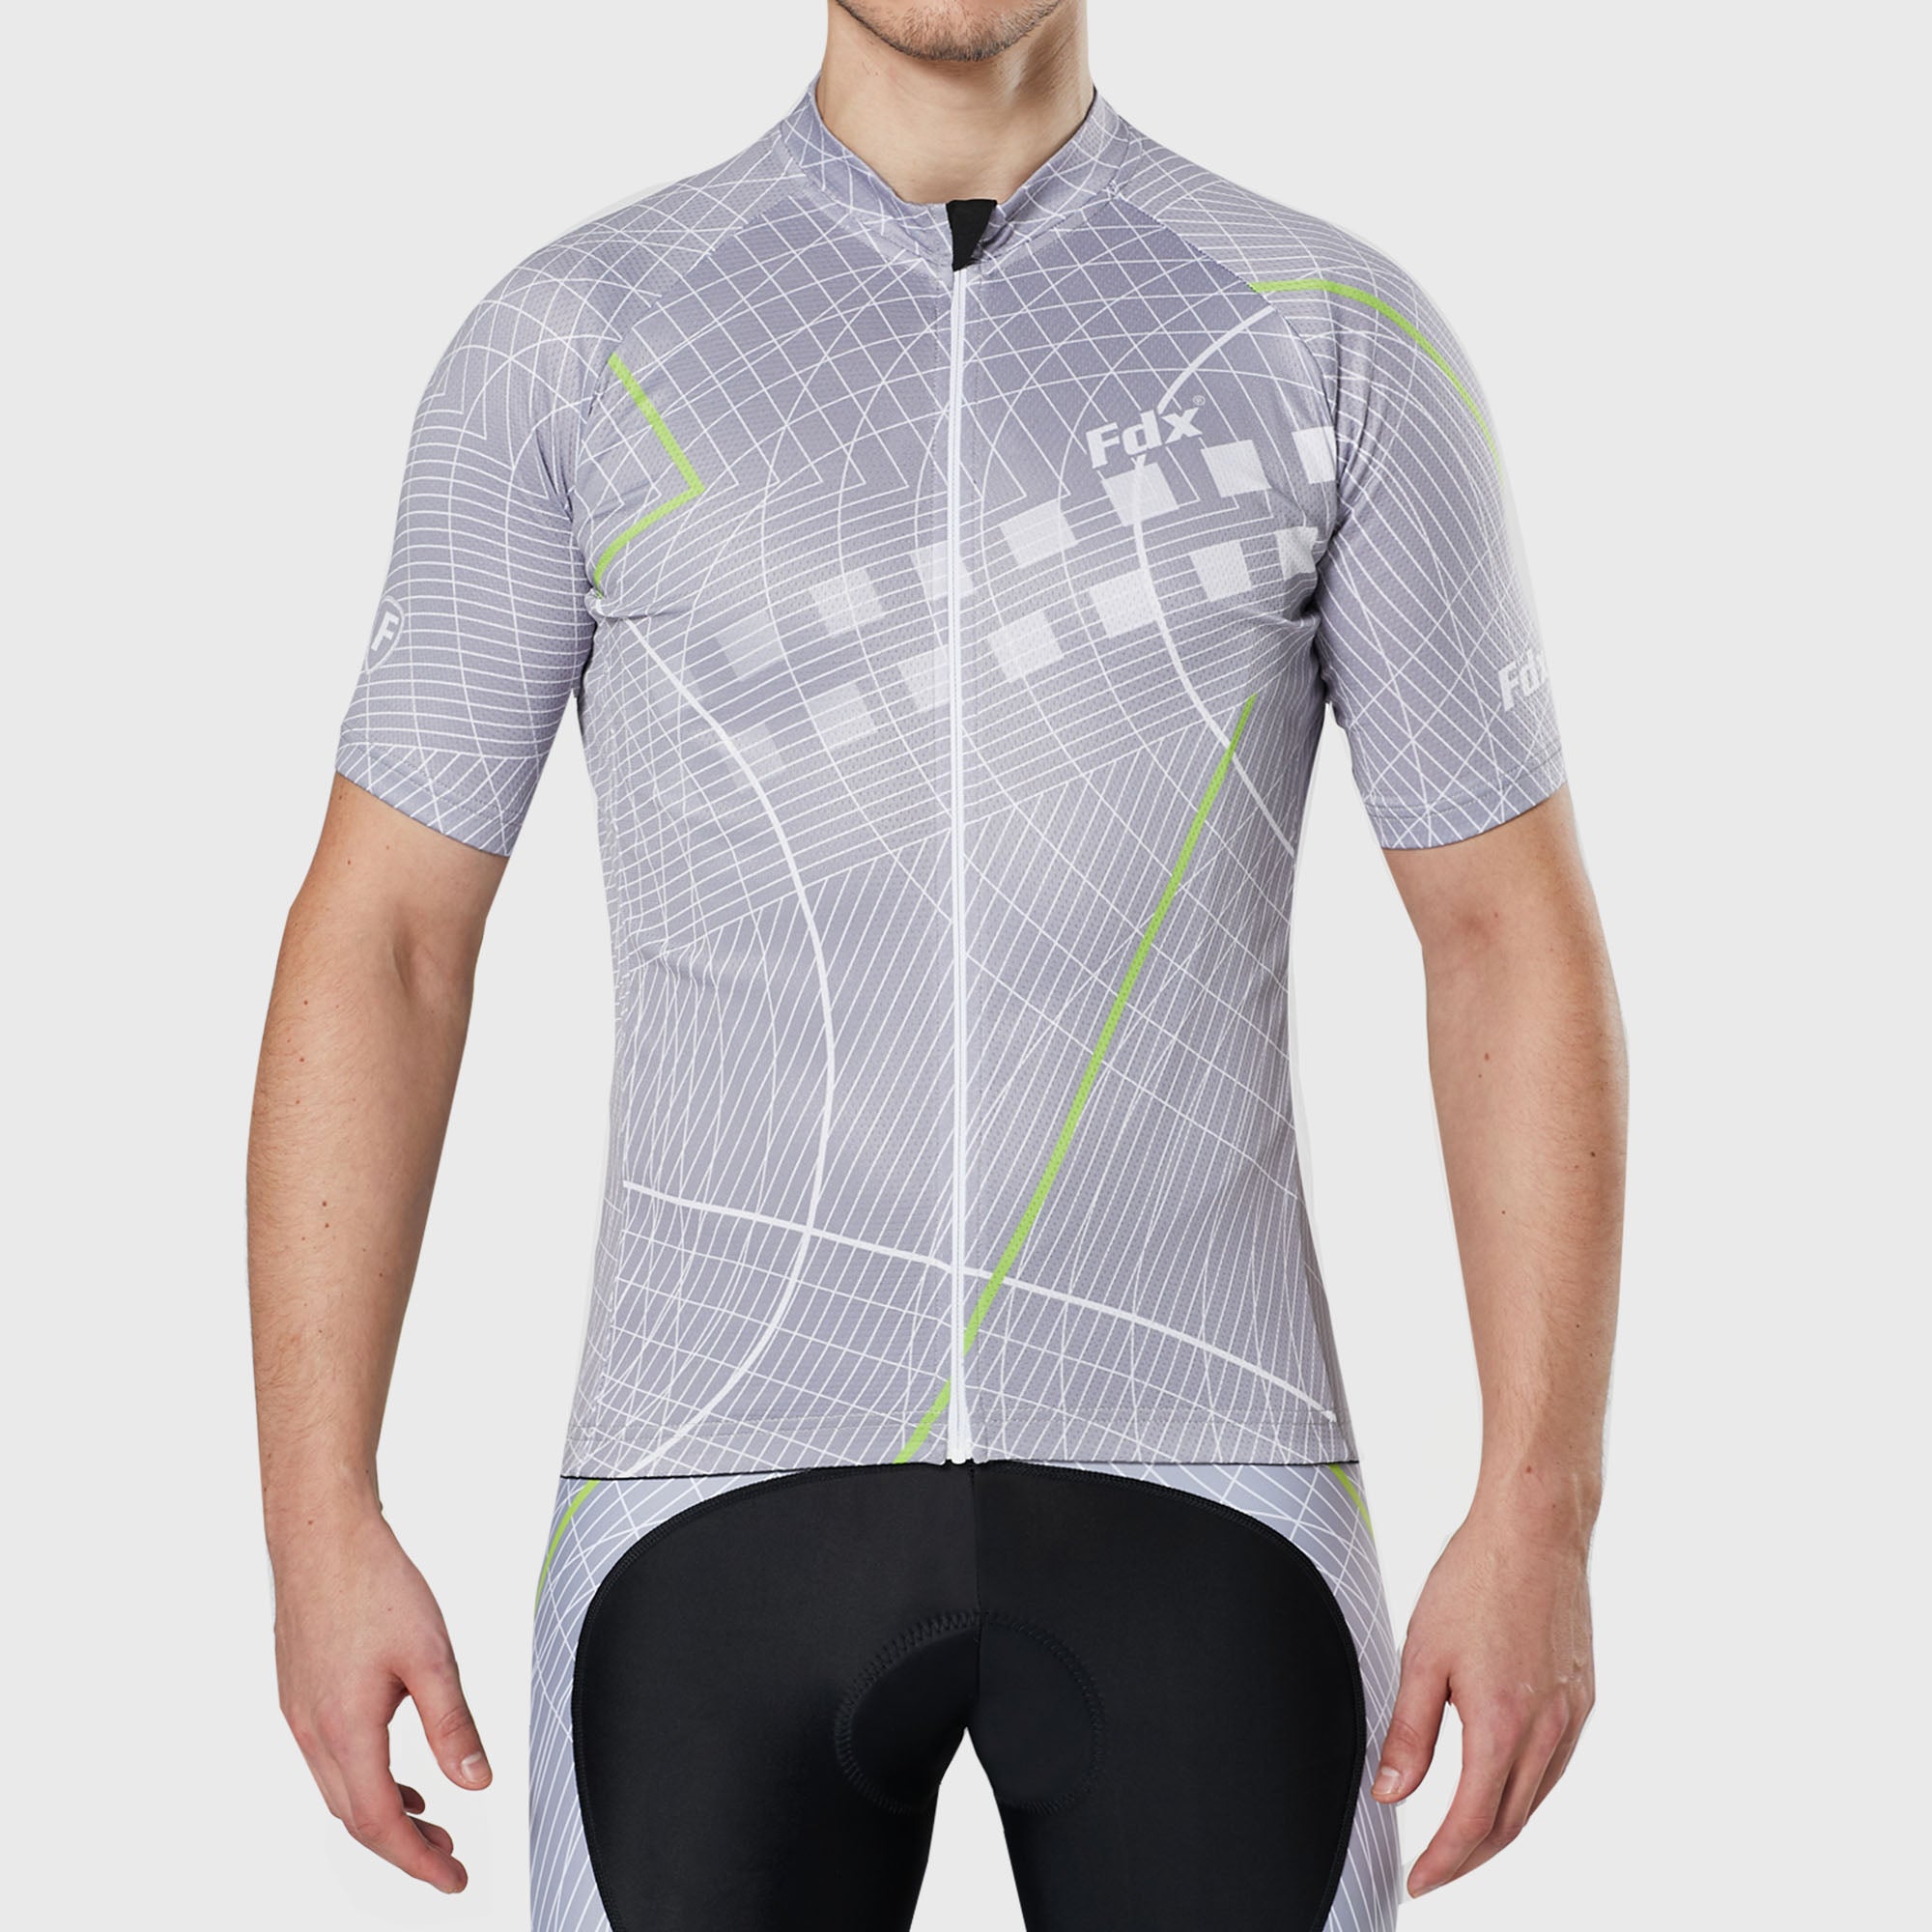 Fdx Grey best men’s short sleeves cycling jersey breathable lightweight hi-viz Reflective details summer biking top, skin friendly full zip half sleeves mesh cycling shirt for indoor & outdoor riding with two back & 1 zip pockets